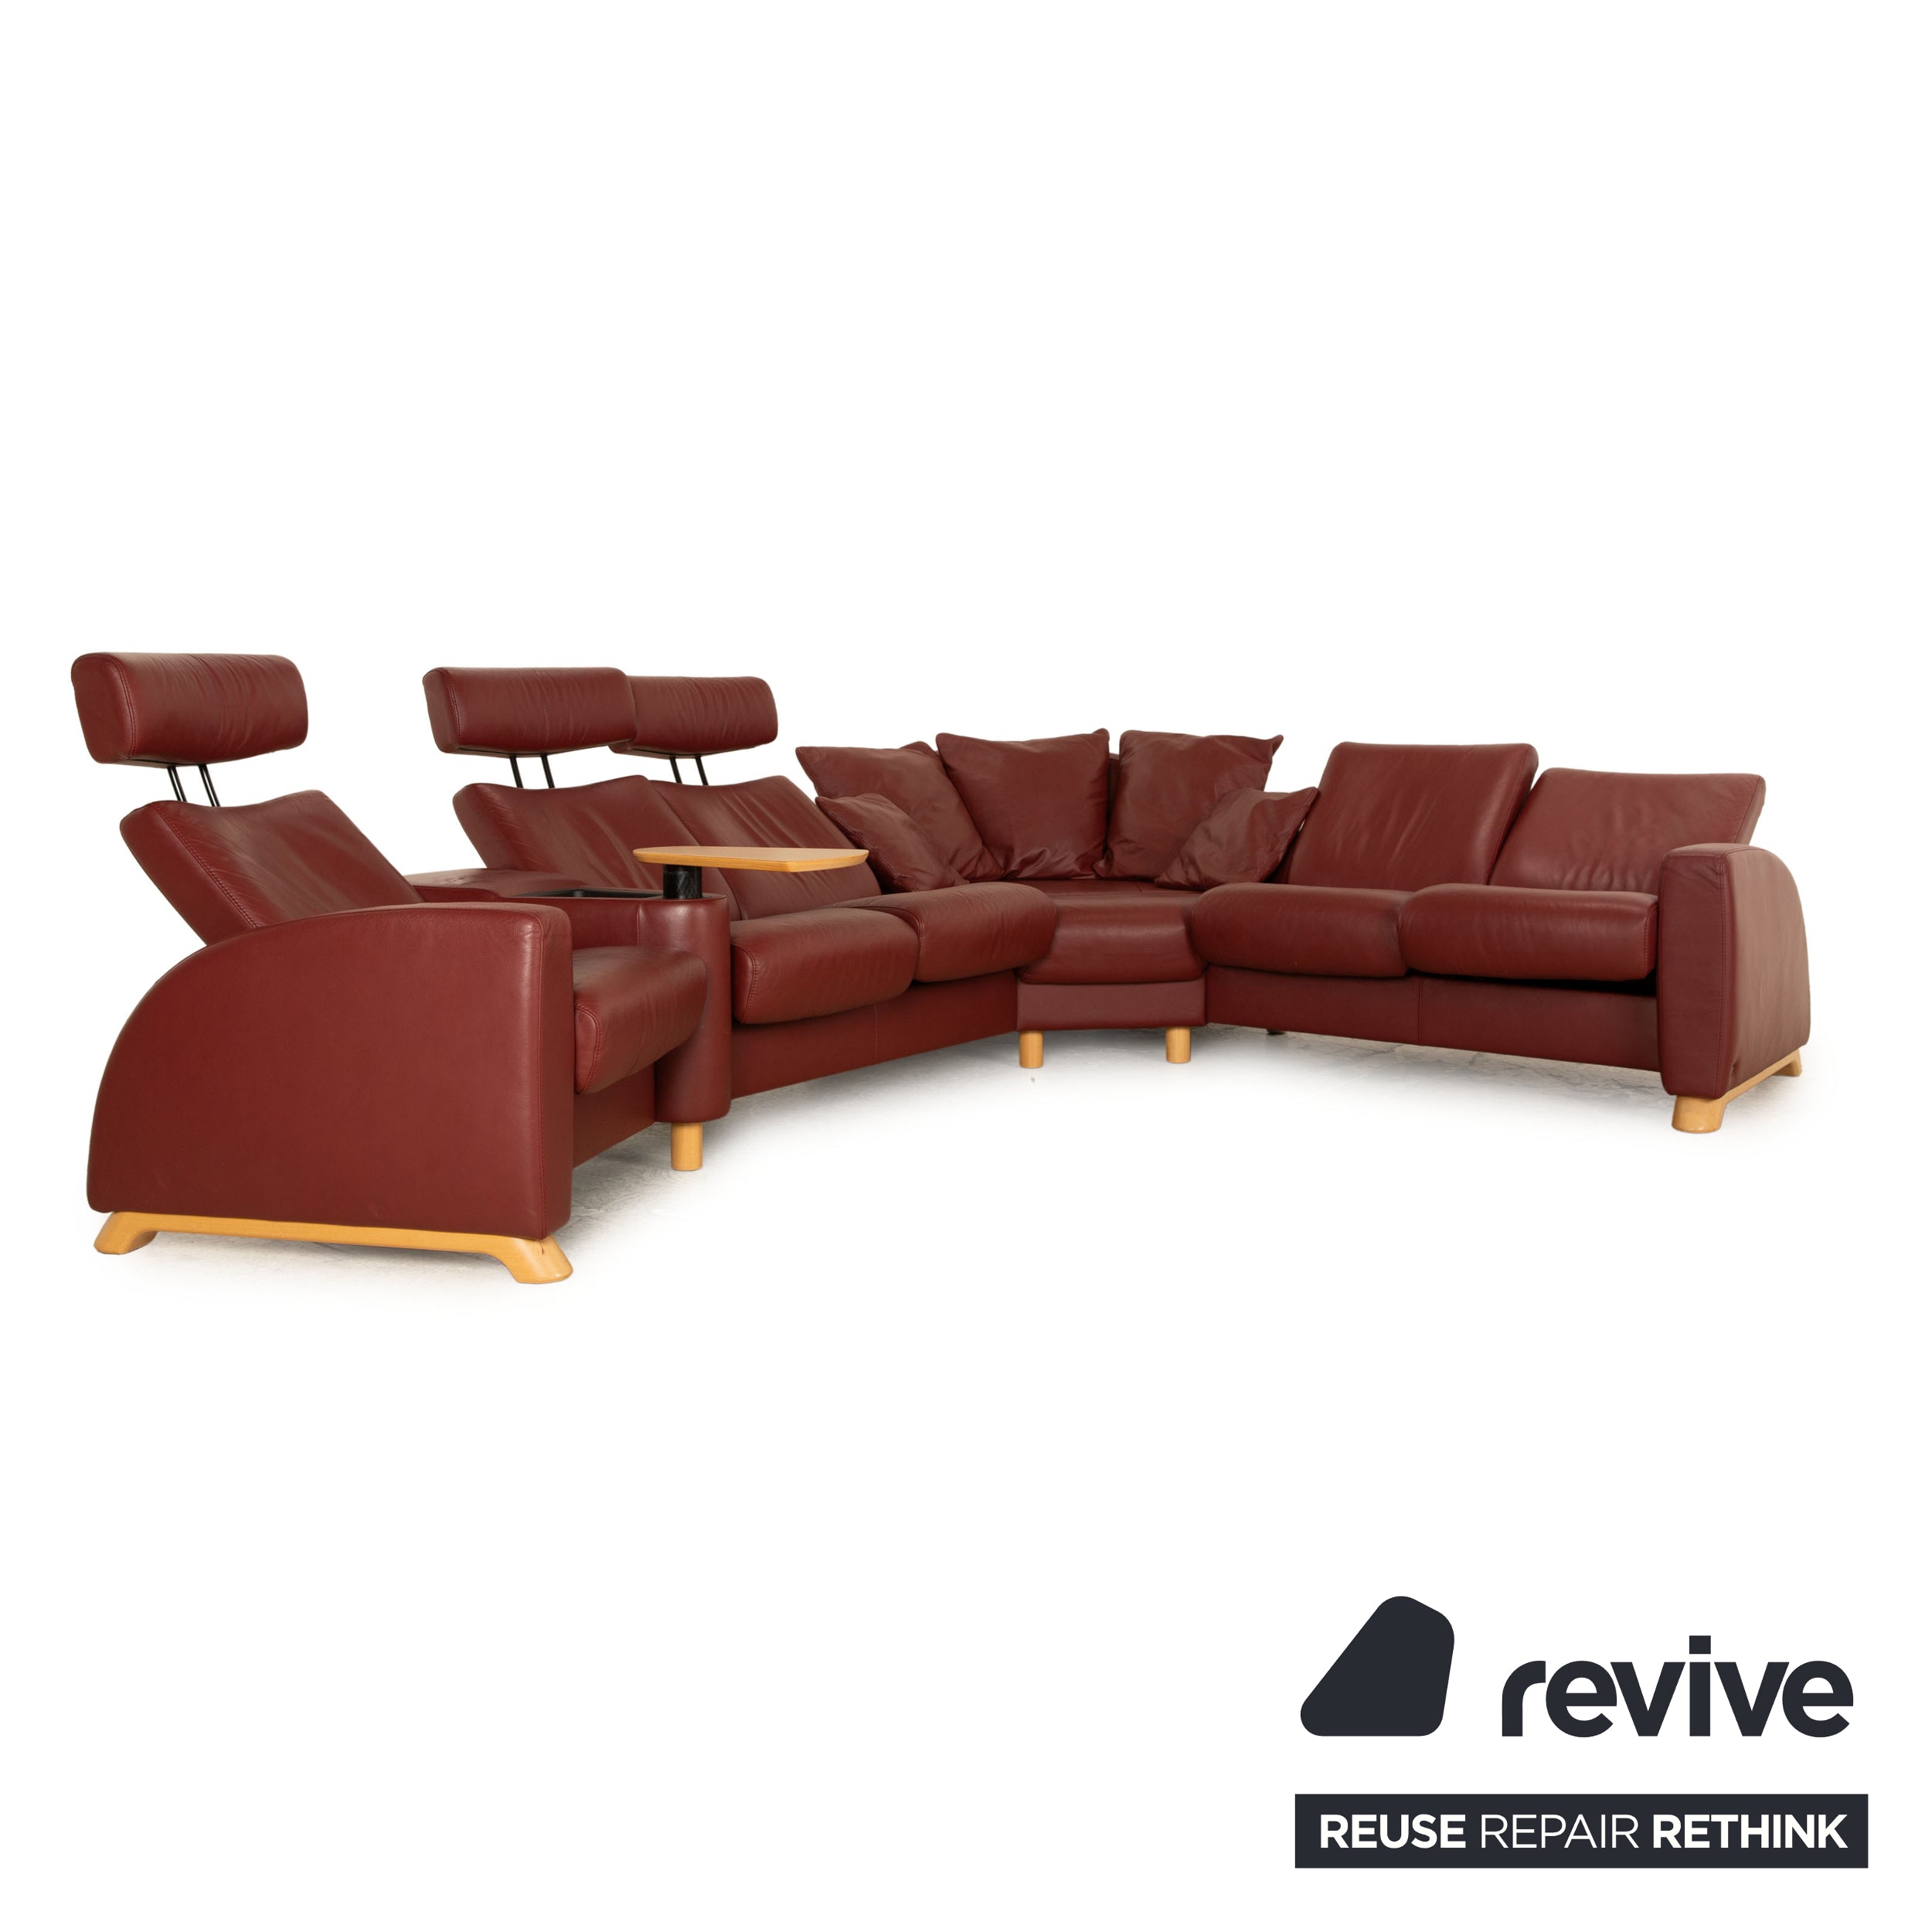 Stressless Arion Leather Corner Sofa Dark Red Manual Function Sofa Couch